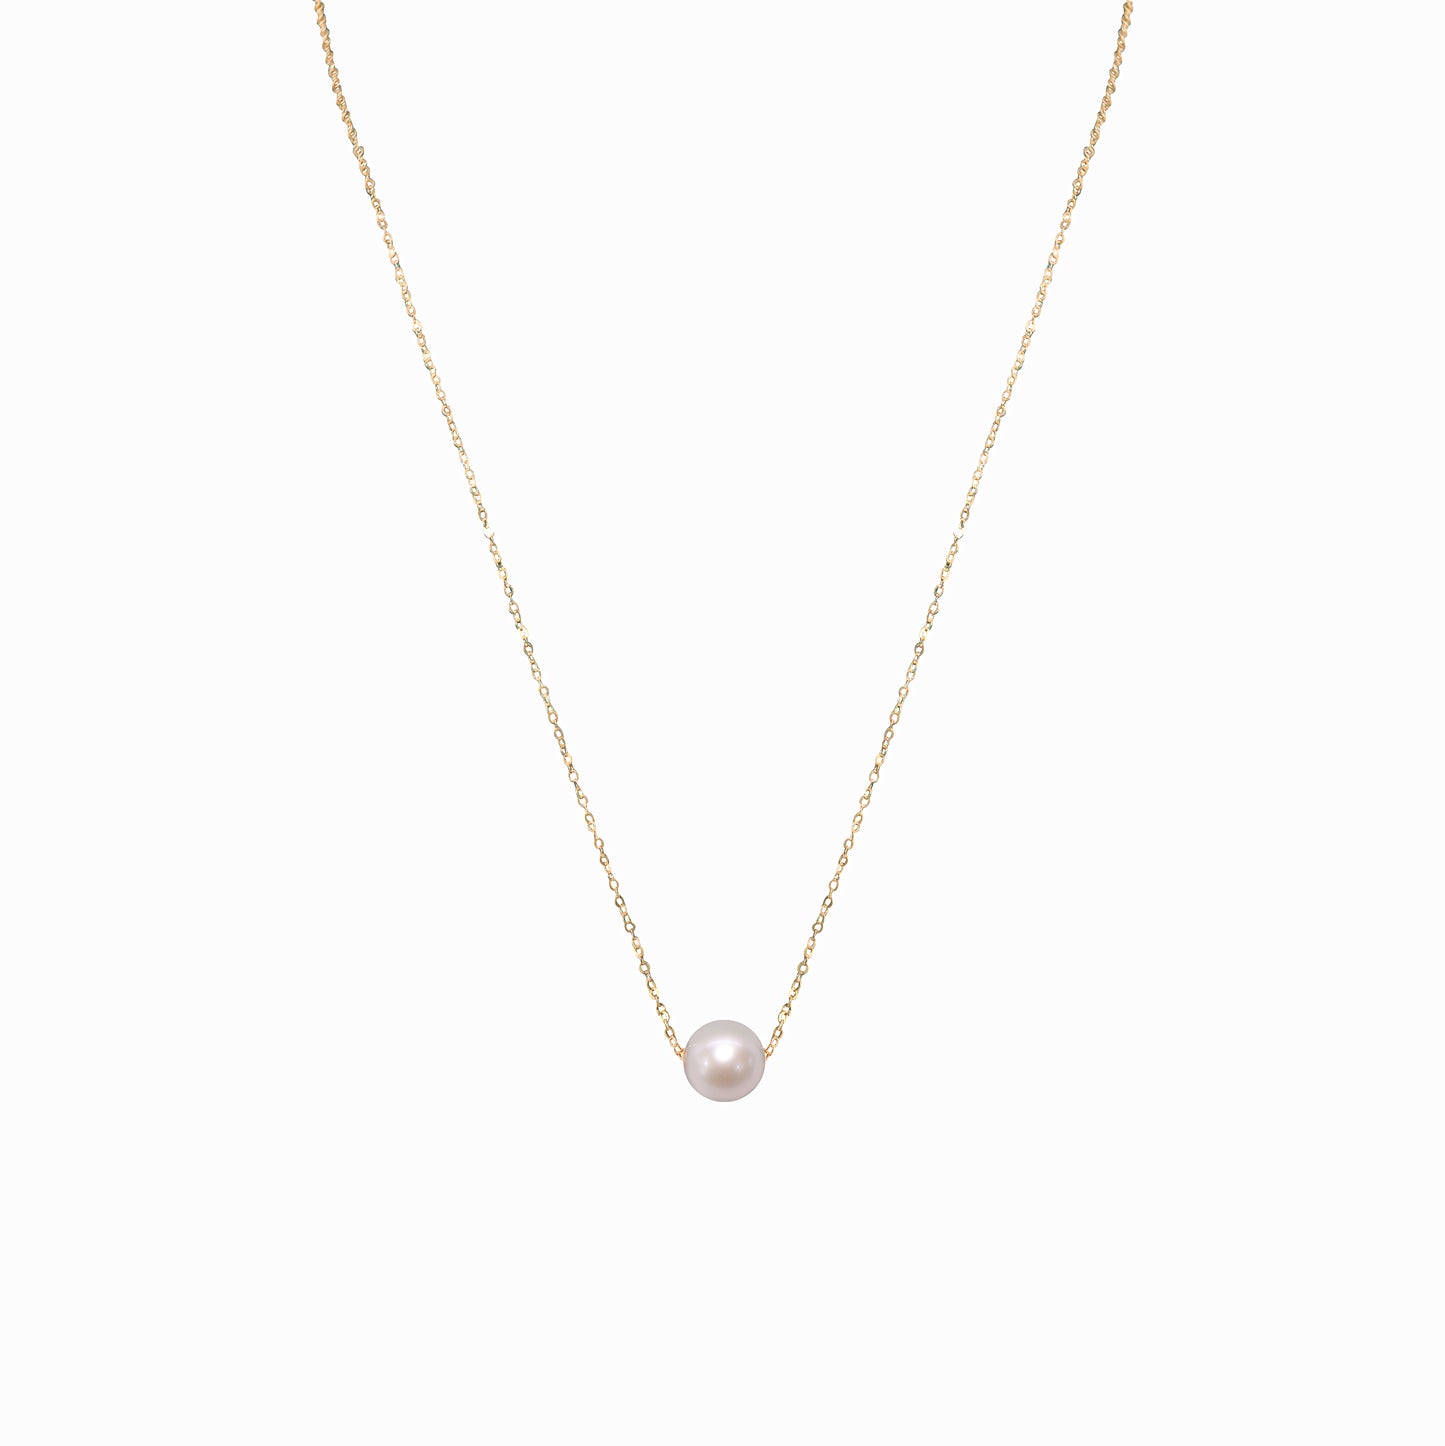 9- 10 mm 18K Golden Solitaire Pearl Necklace